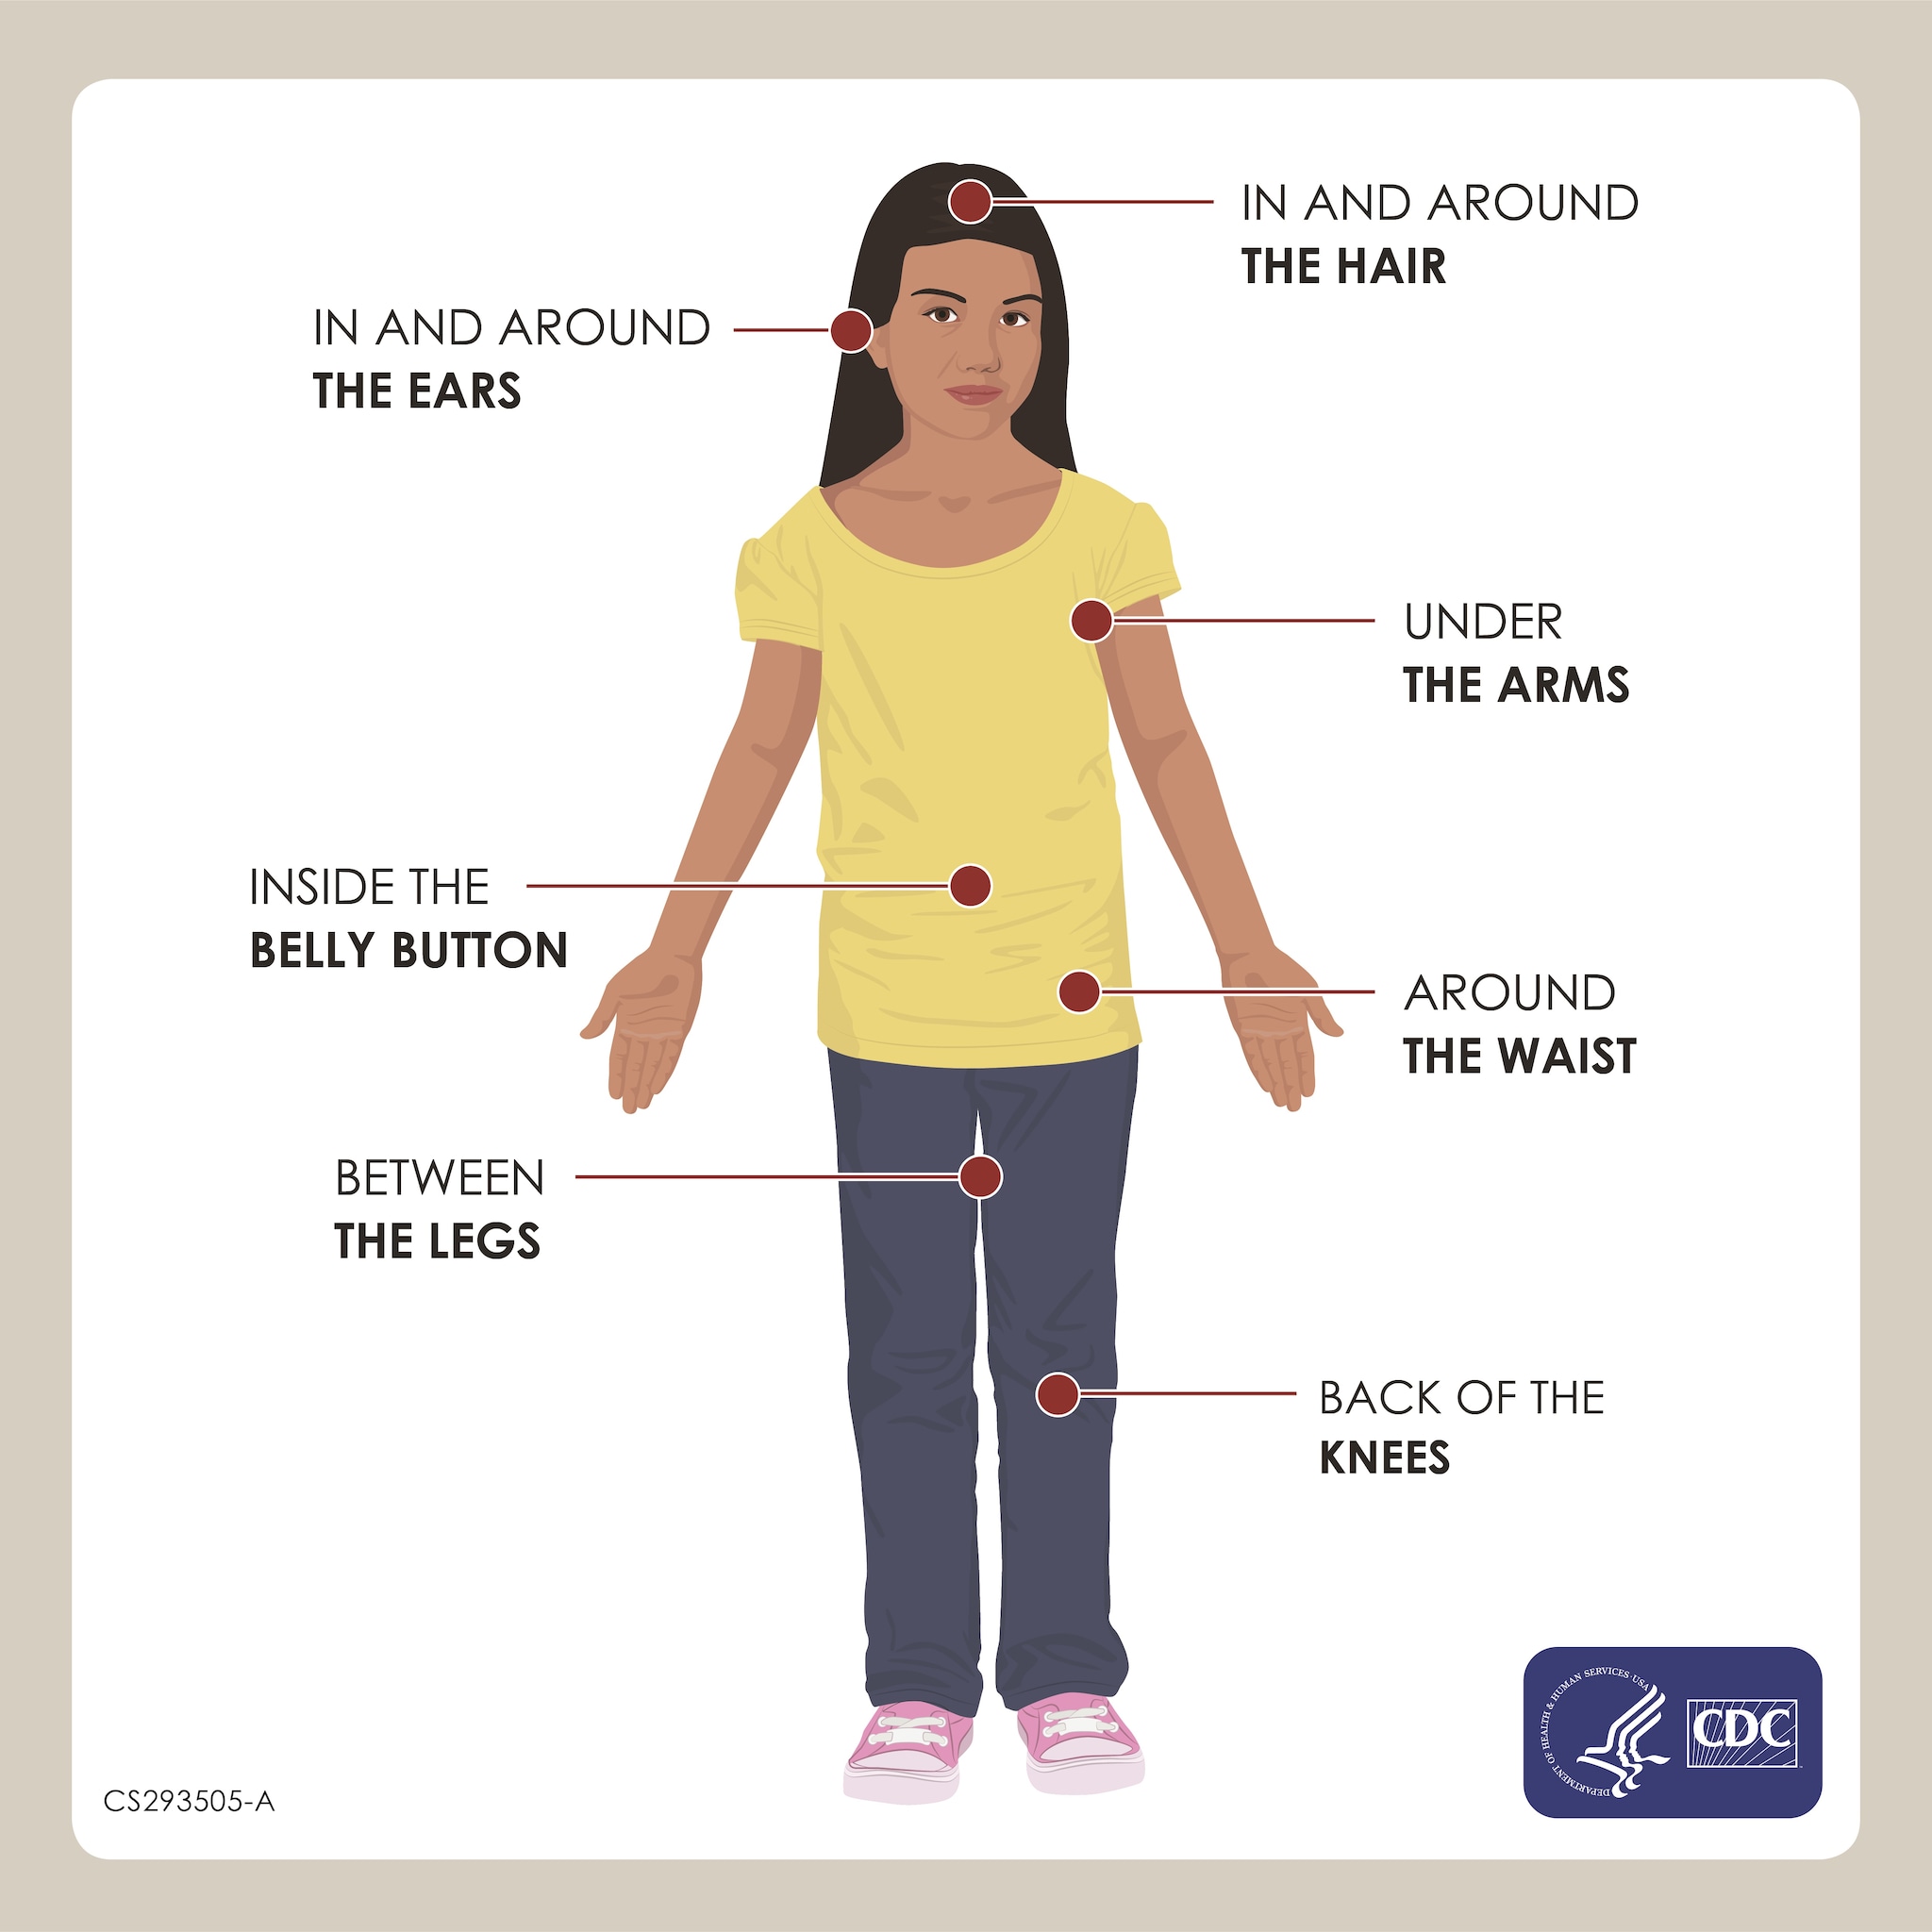 Diagram of a girl illustrating where on the body to look for ticks.